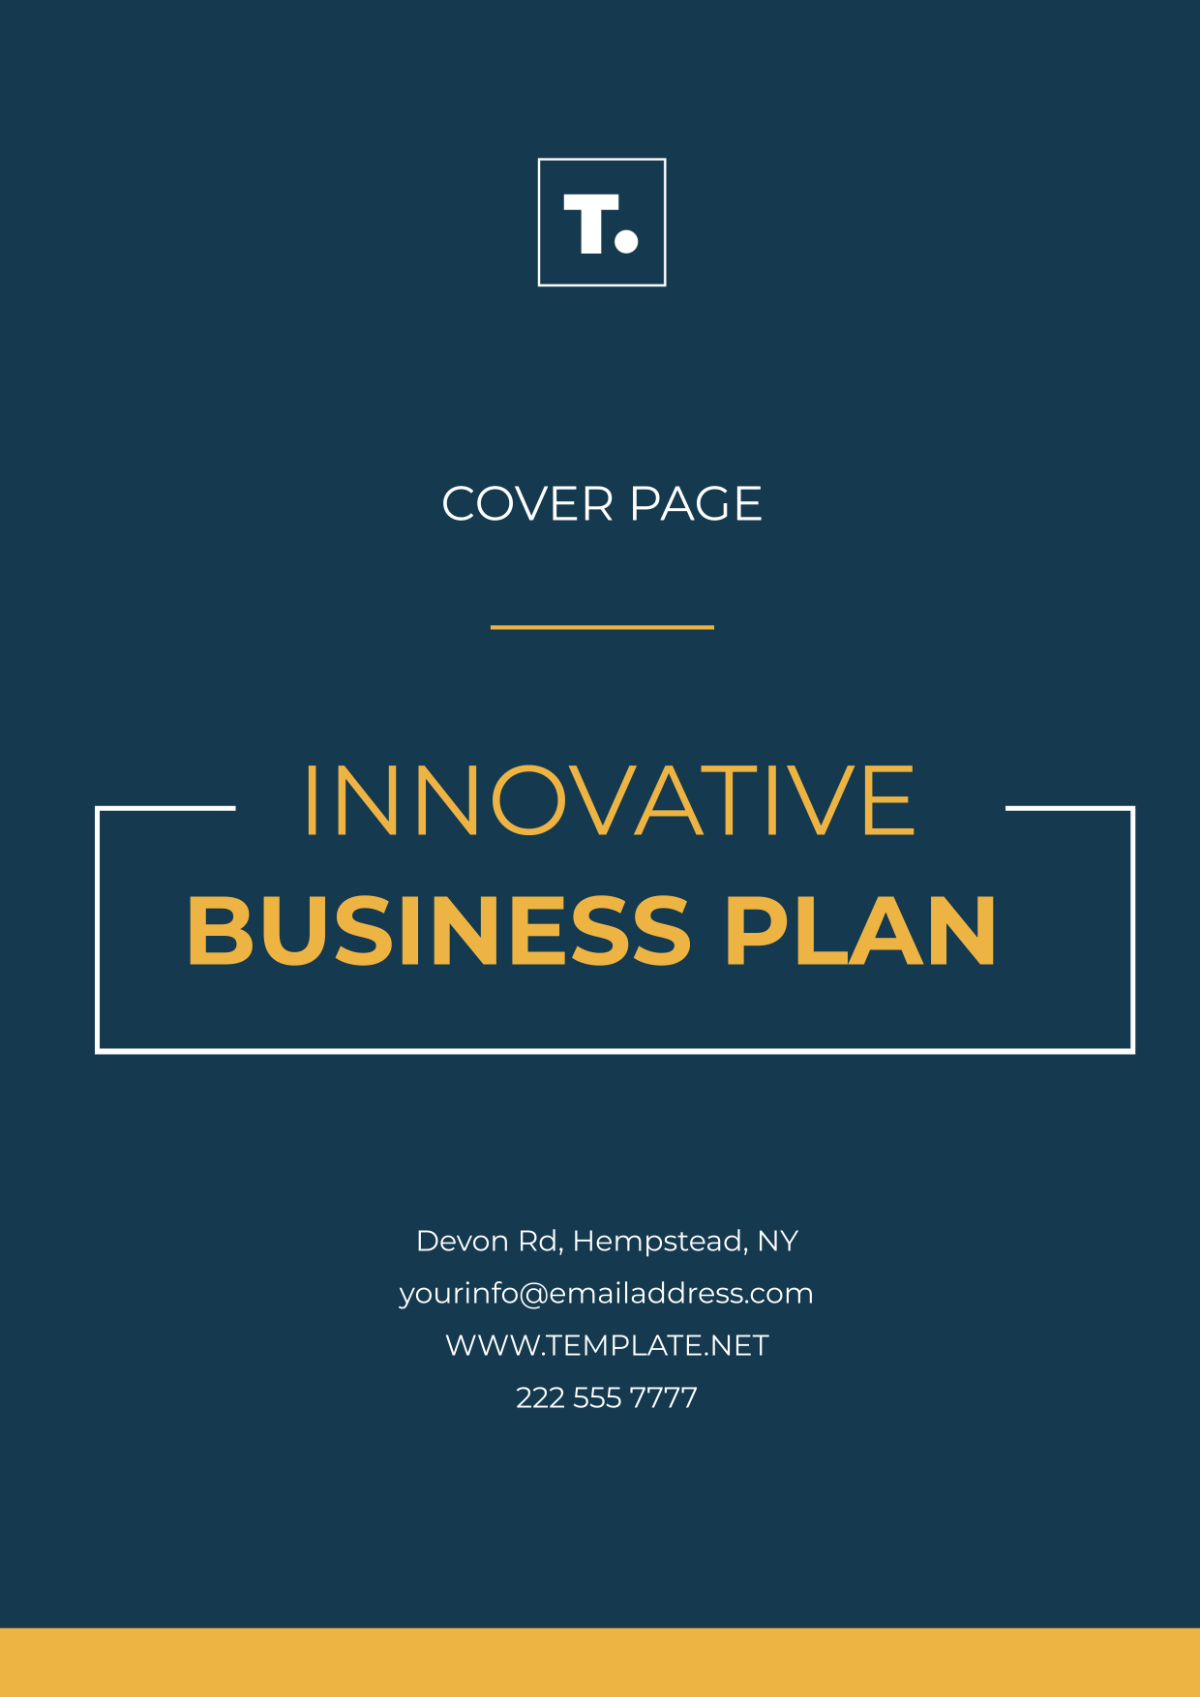 Business Plan Innovative Cover Page